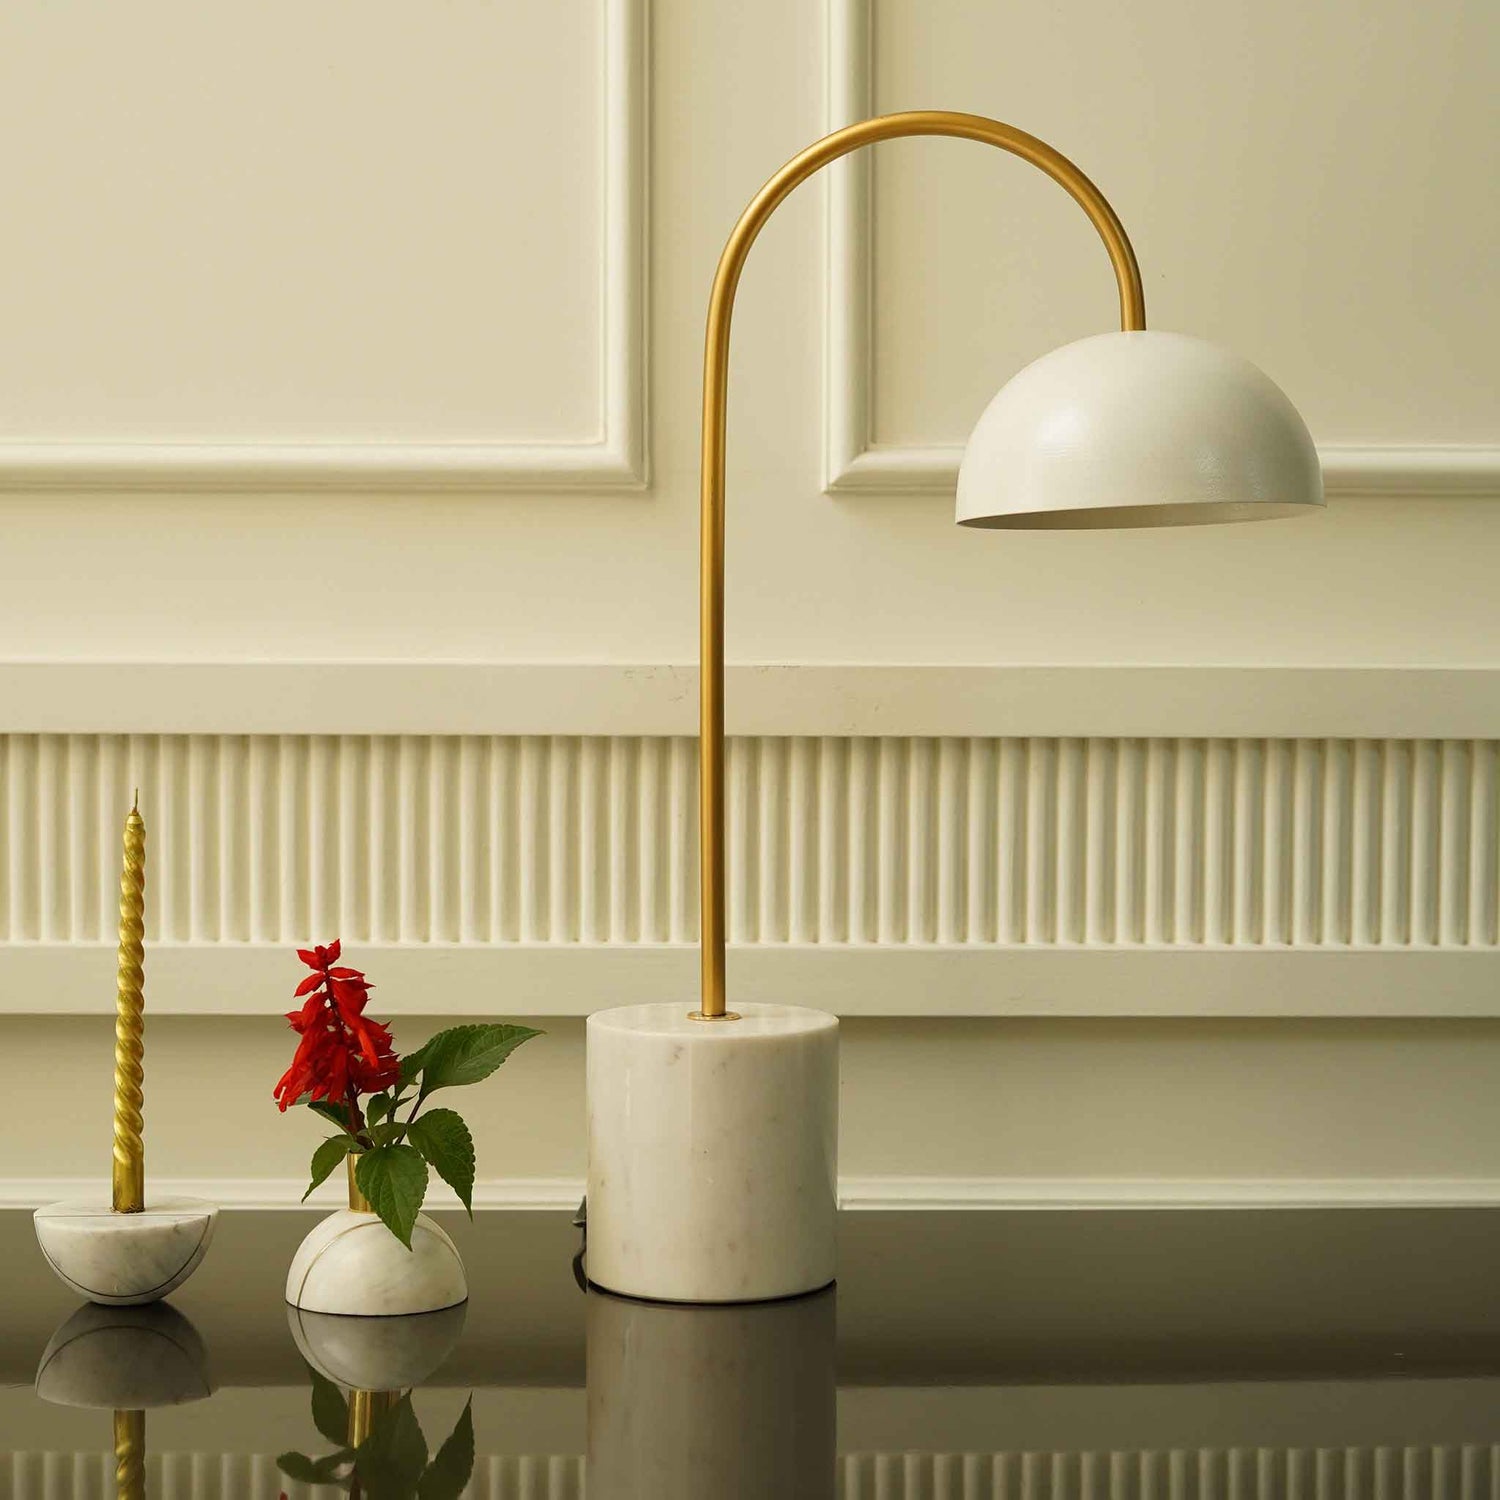 Cylindrical base white marble table lamp with golden curved stem and a white metallic shade.